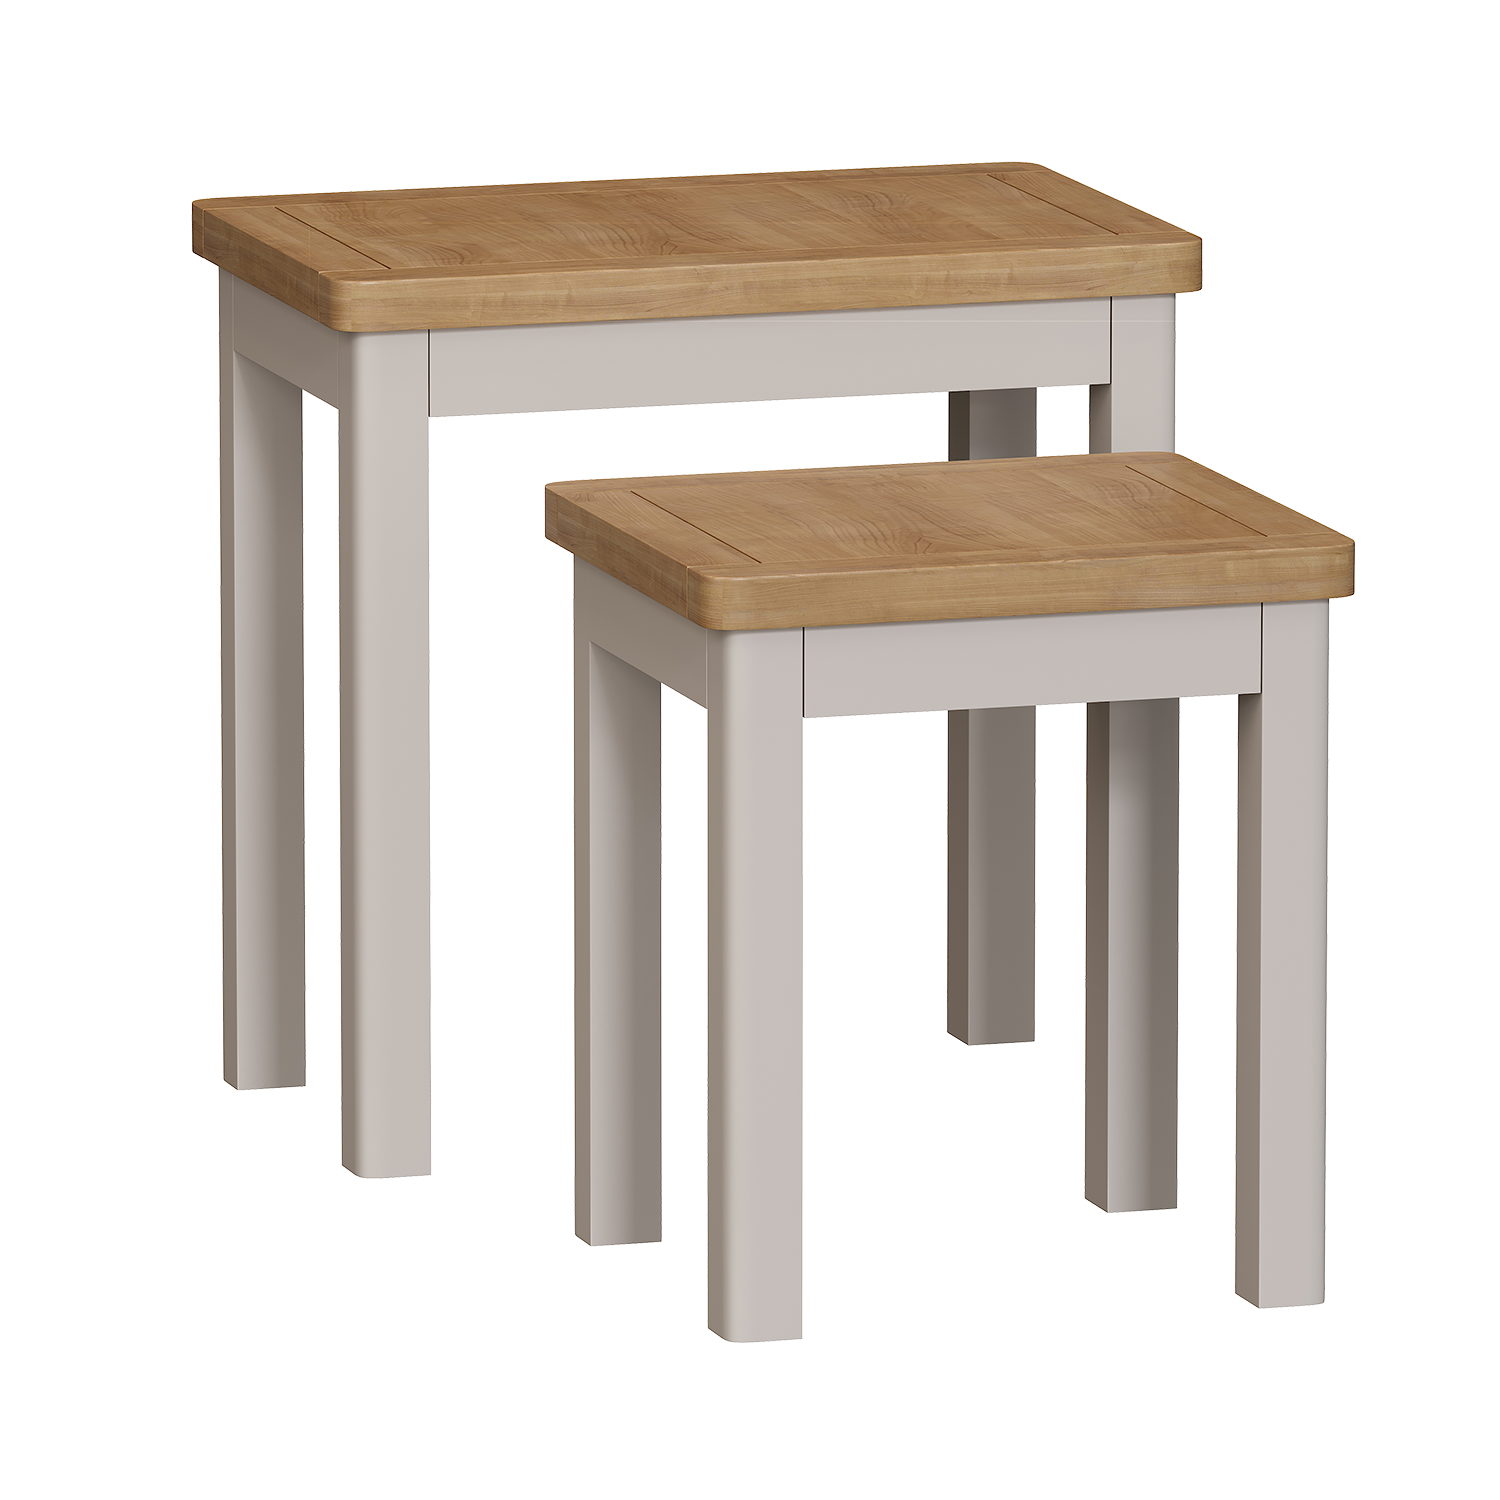 Chiltern Dove Nest of 2 Tables